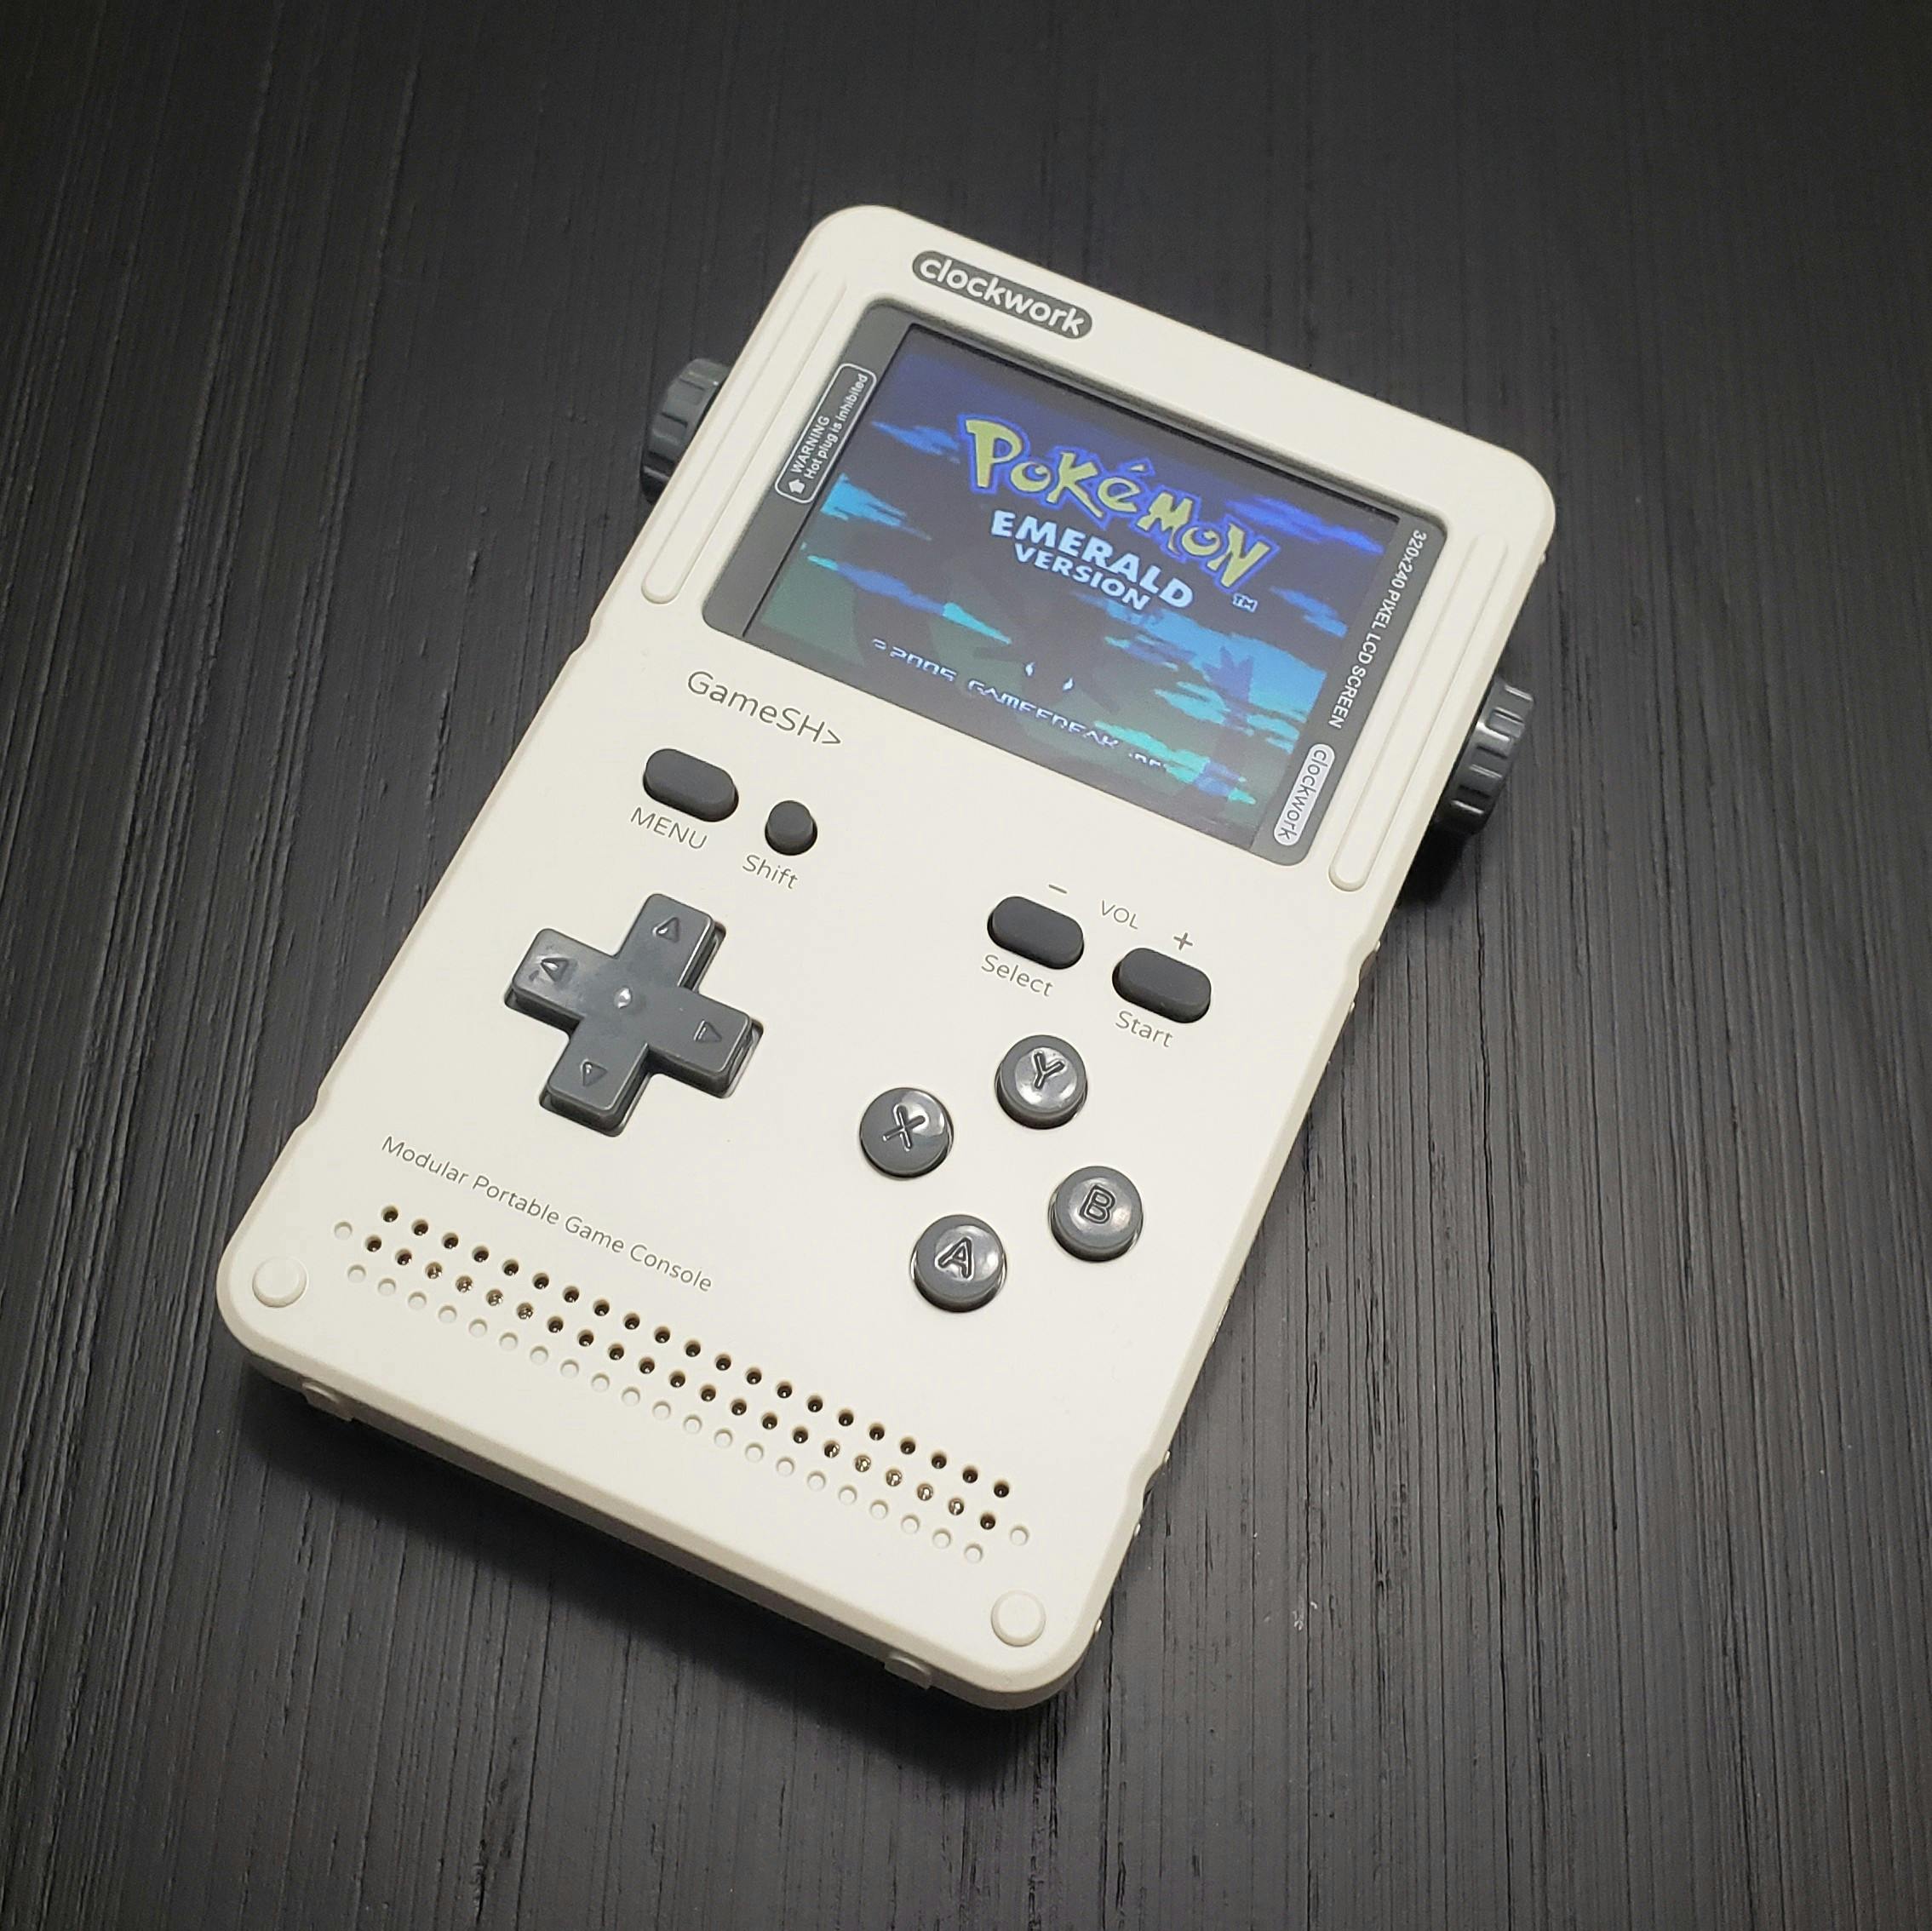 Review: The ClockworkPi GameShell Hackable Handheld Console